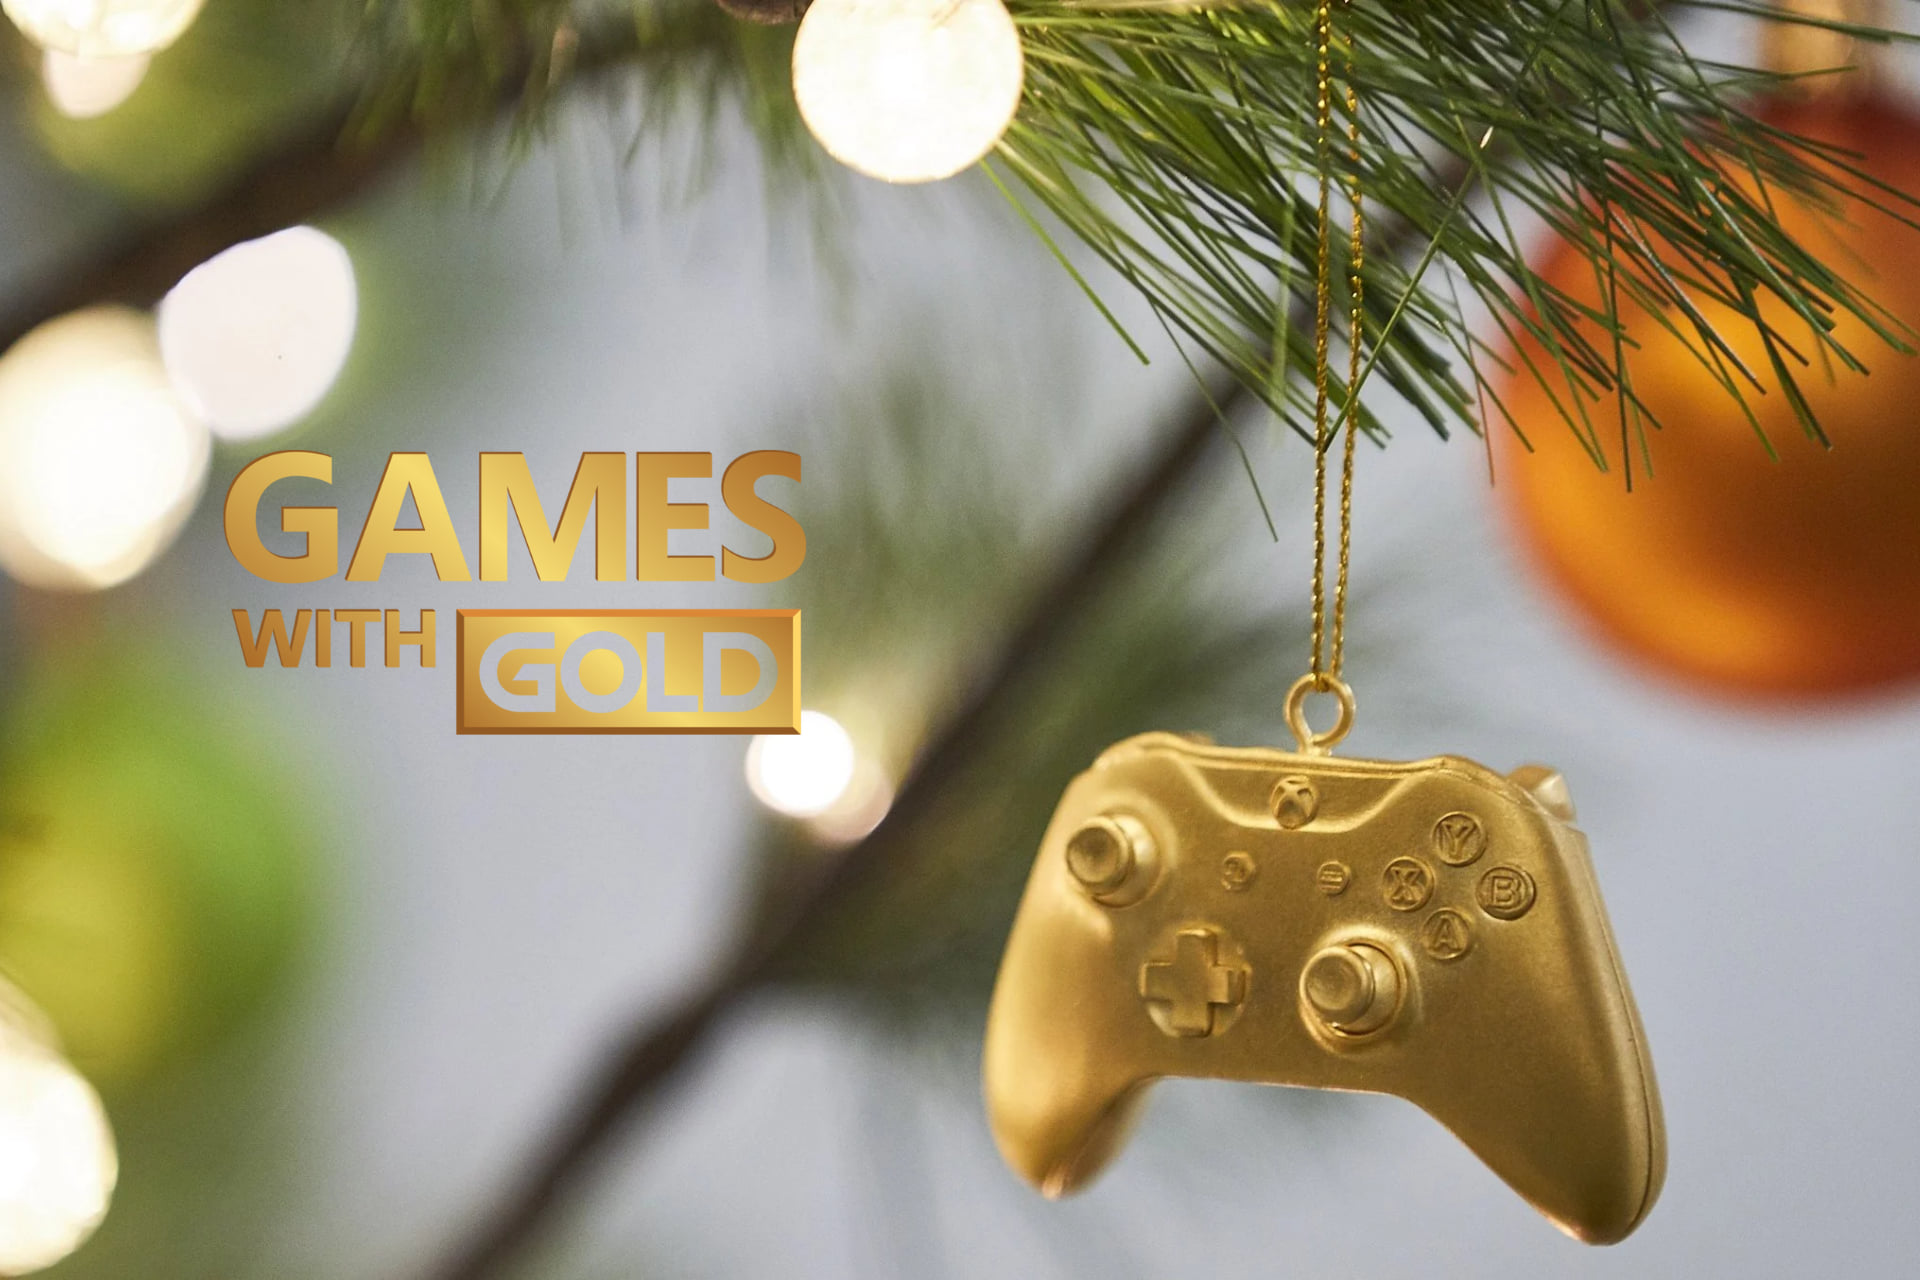 Ruilhandel domein Pluche pop Xbox Gold All-Star members get 5 months of Game Pass